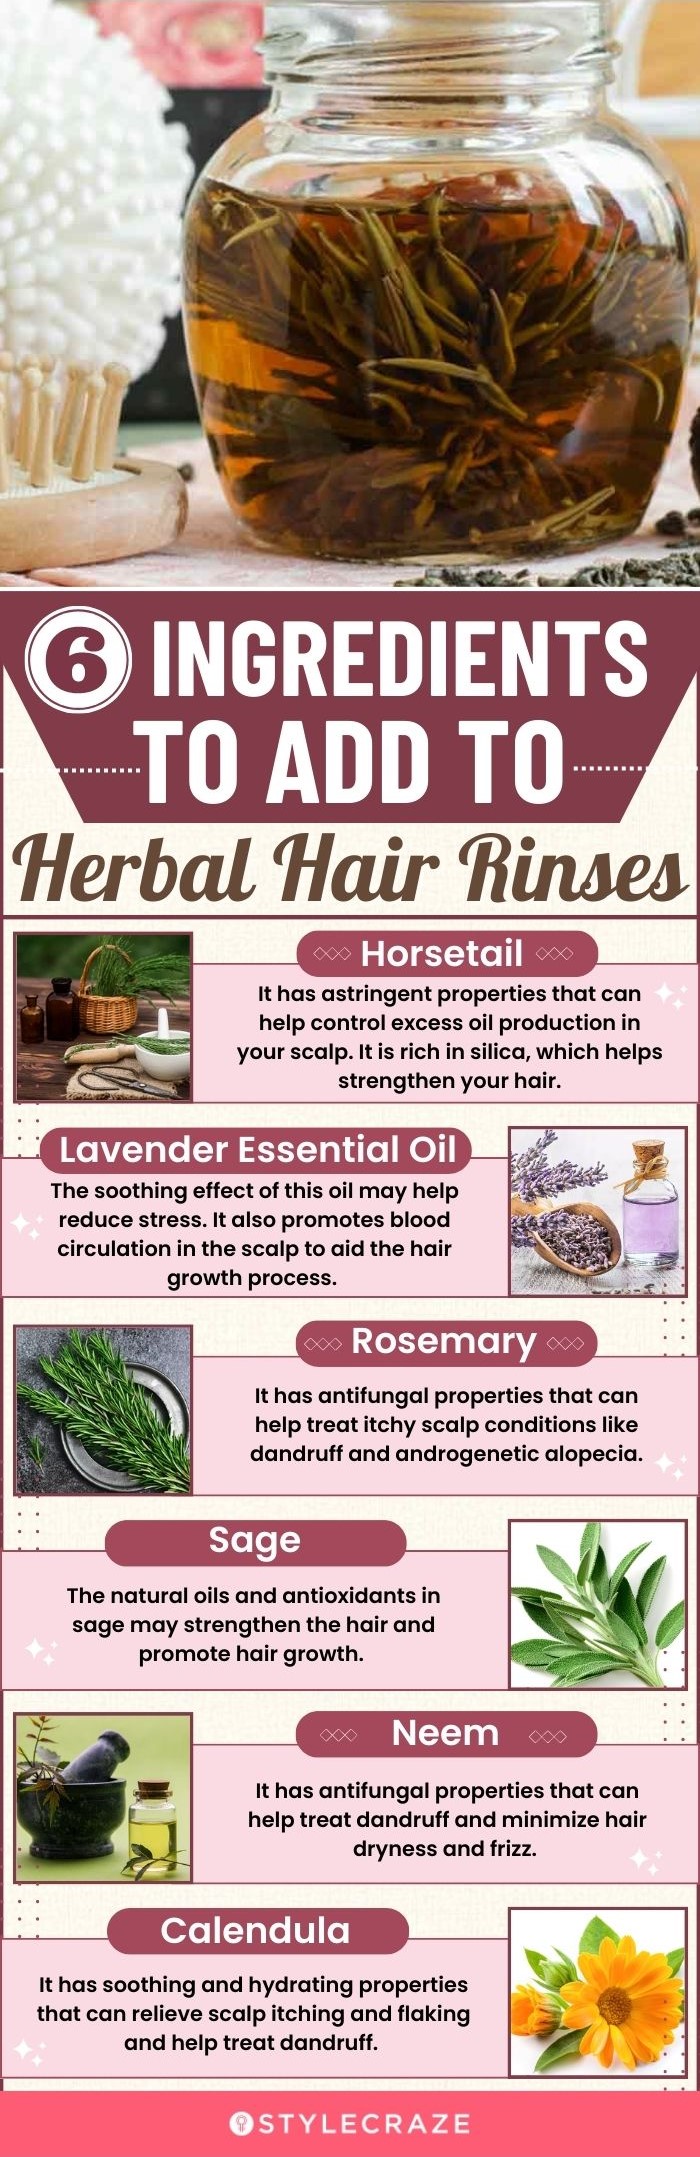 6 ingredients to add to herbal hair rinses(infographic)